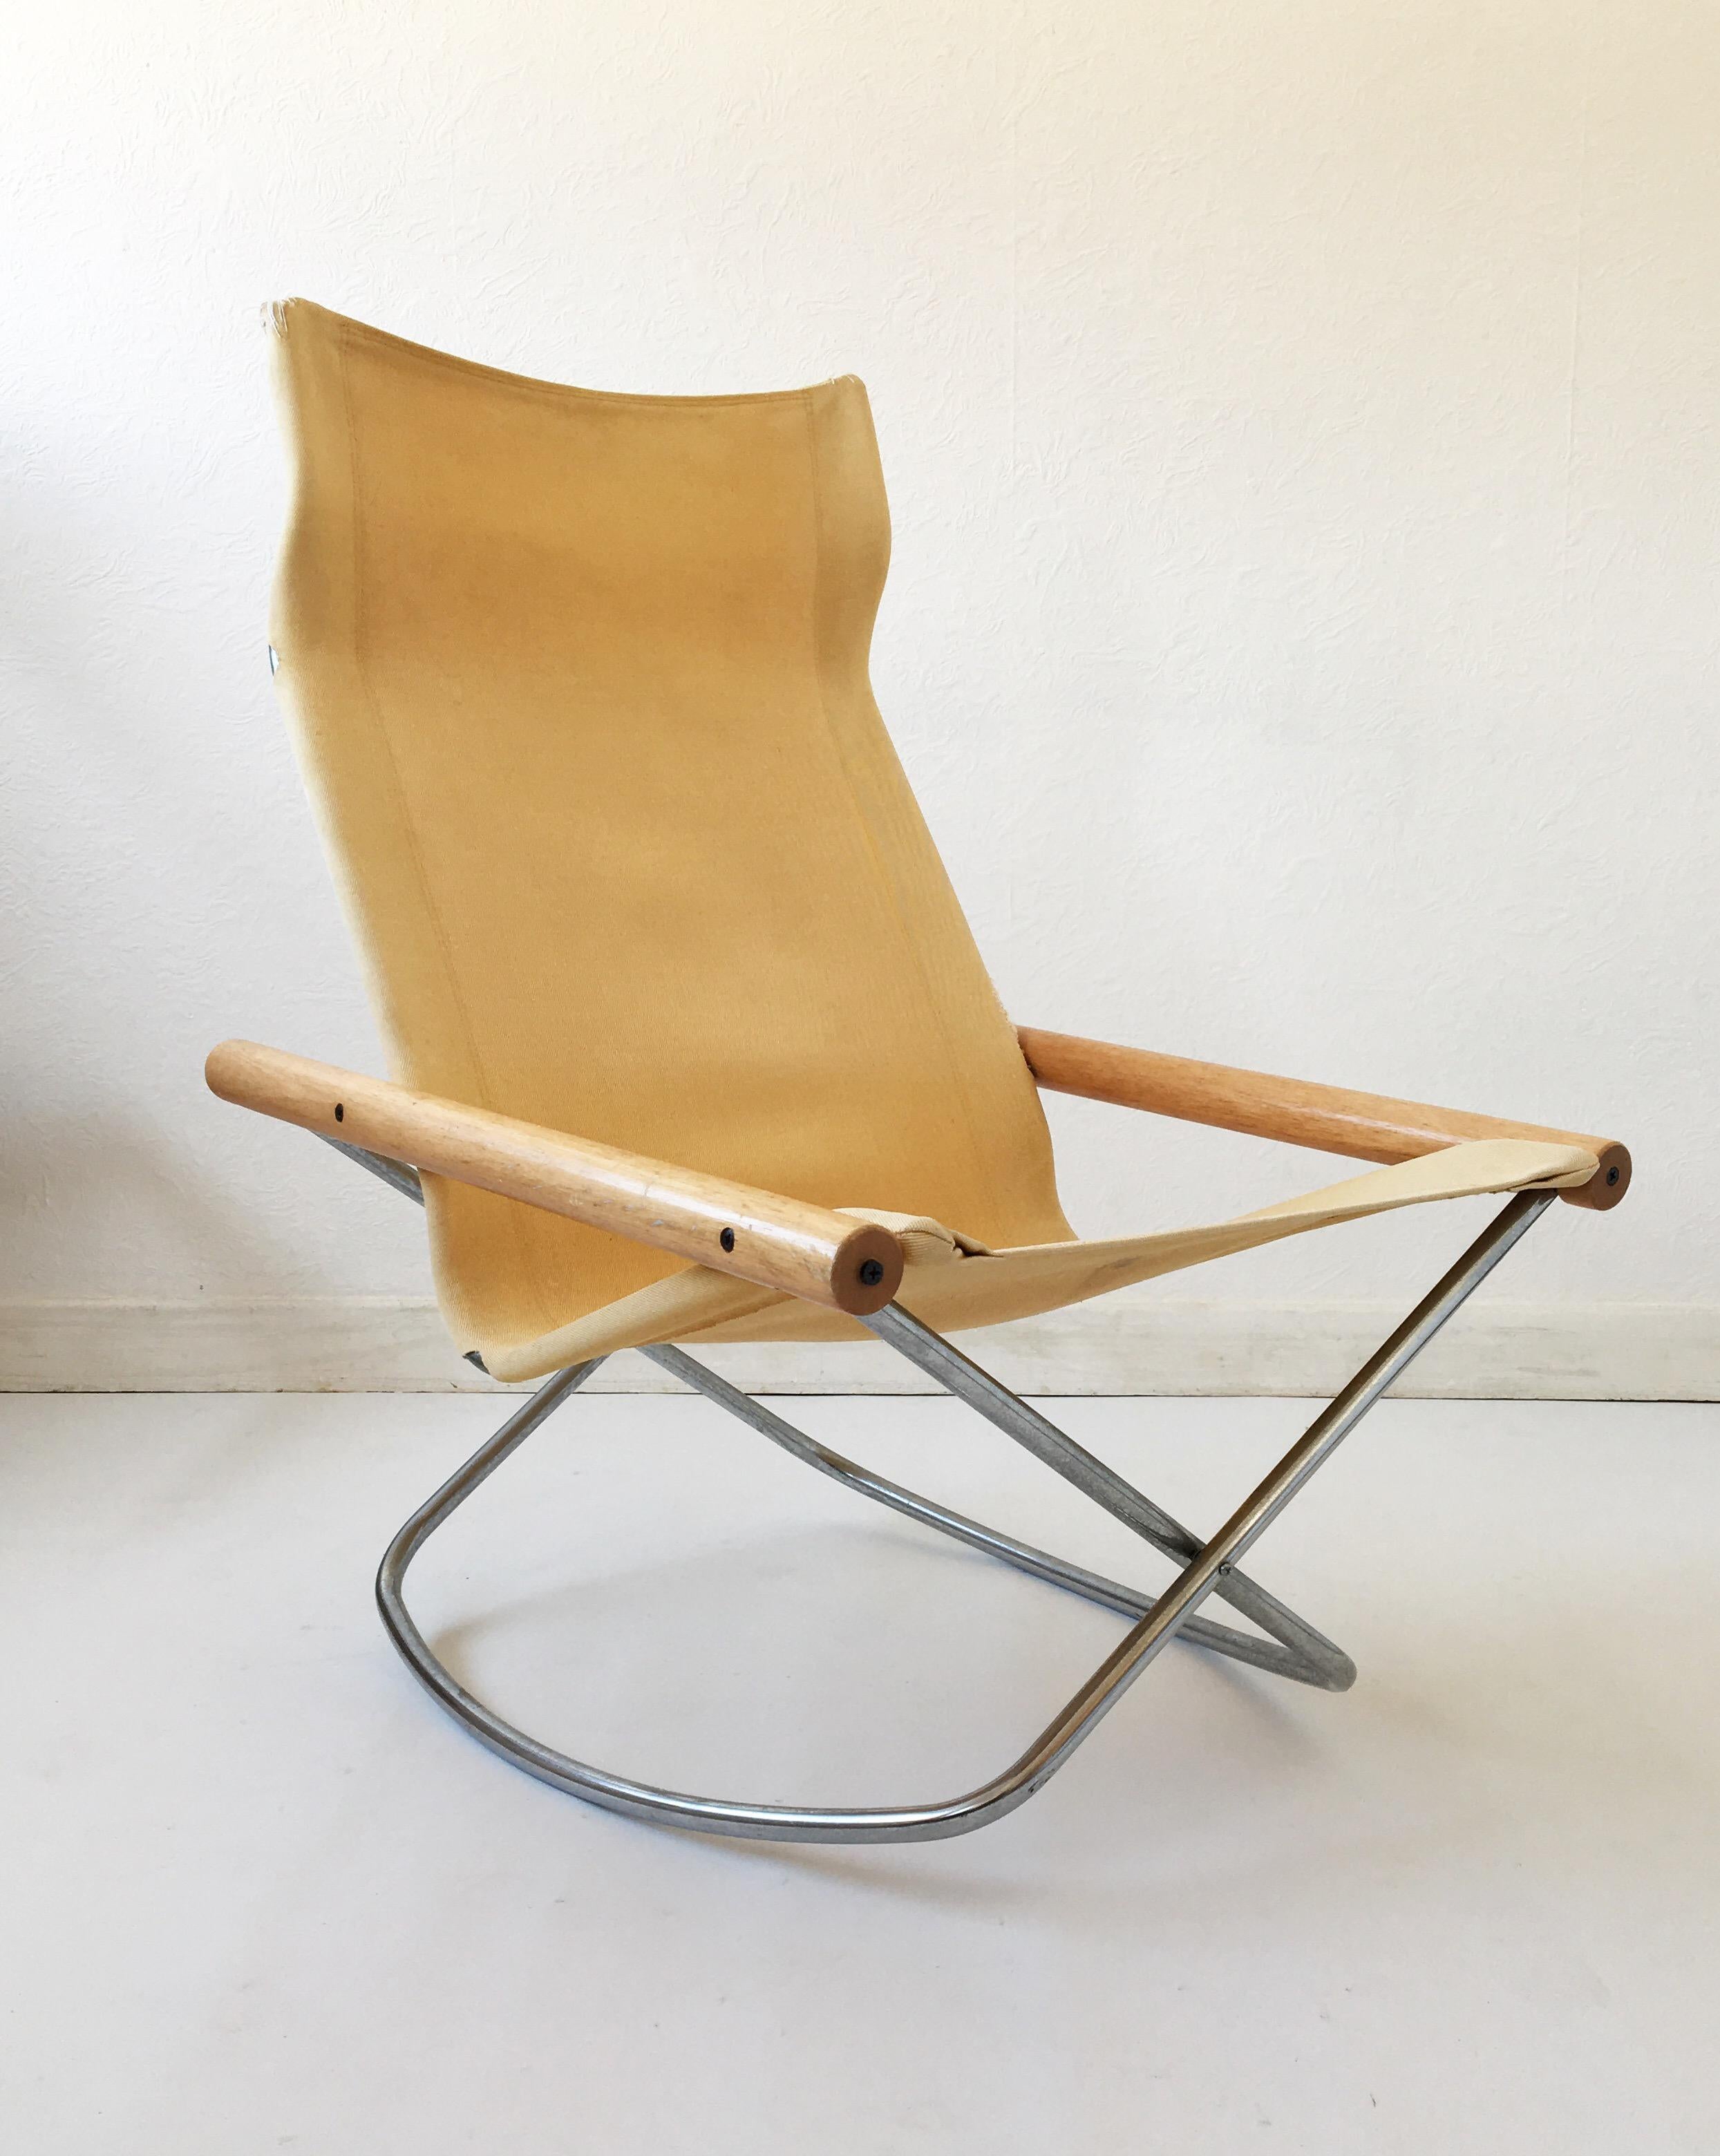 Two folding and rocking chairs designed by Japanese designer Takeshi Nii in 1958 and produced by Jox Interni, Italy. The chair was named 'NY' after the designer's family name, meaning 'new' in Danish. It has won many awards and became a permanent